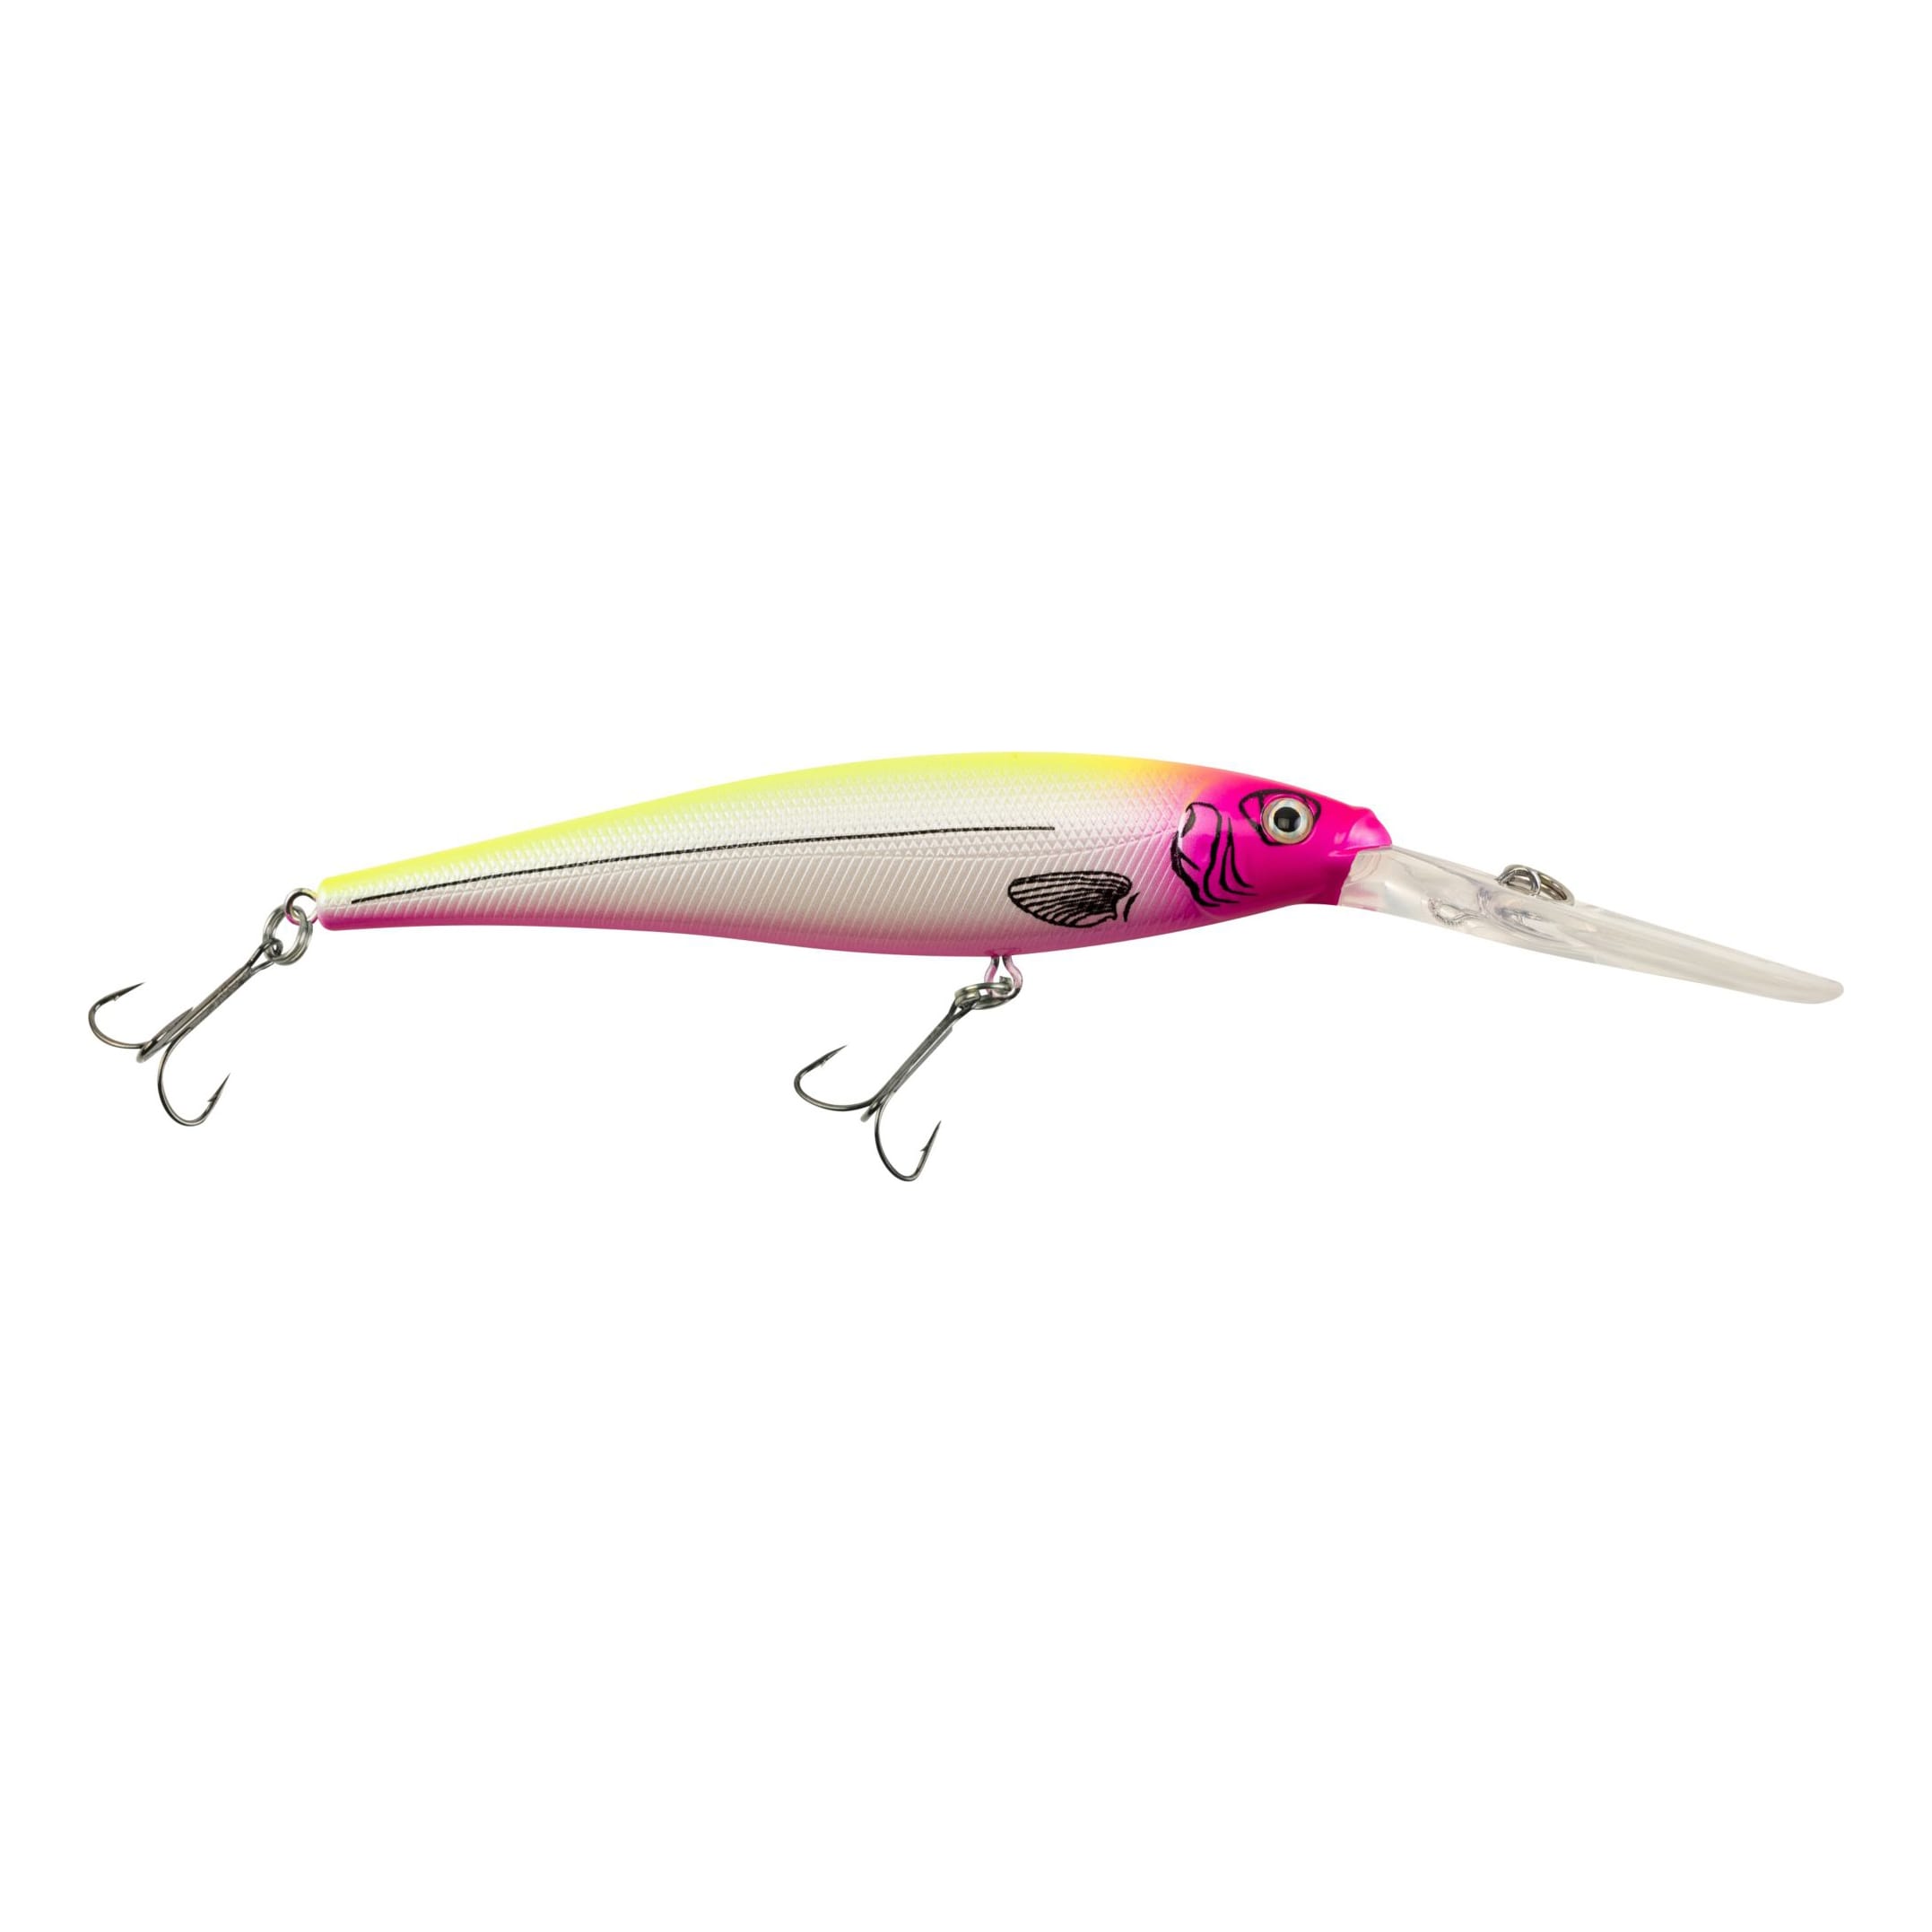 Reef Runner Deep Diver 800 Series in Pink Lemonade, Size 6 3/16 from The Fishin' Hole